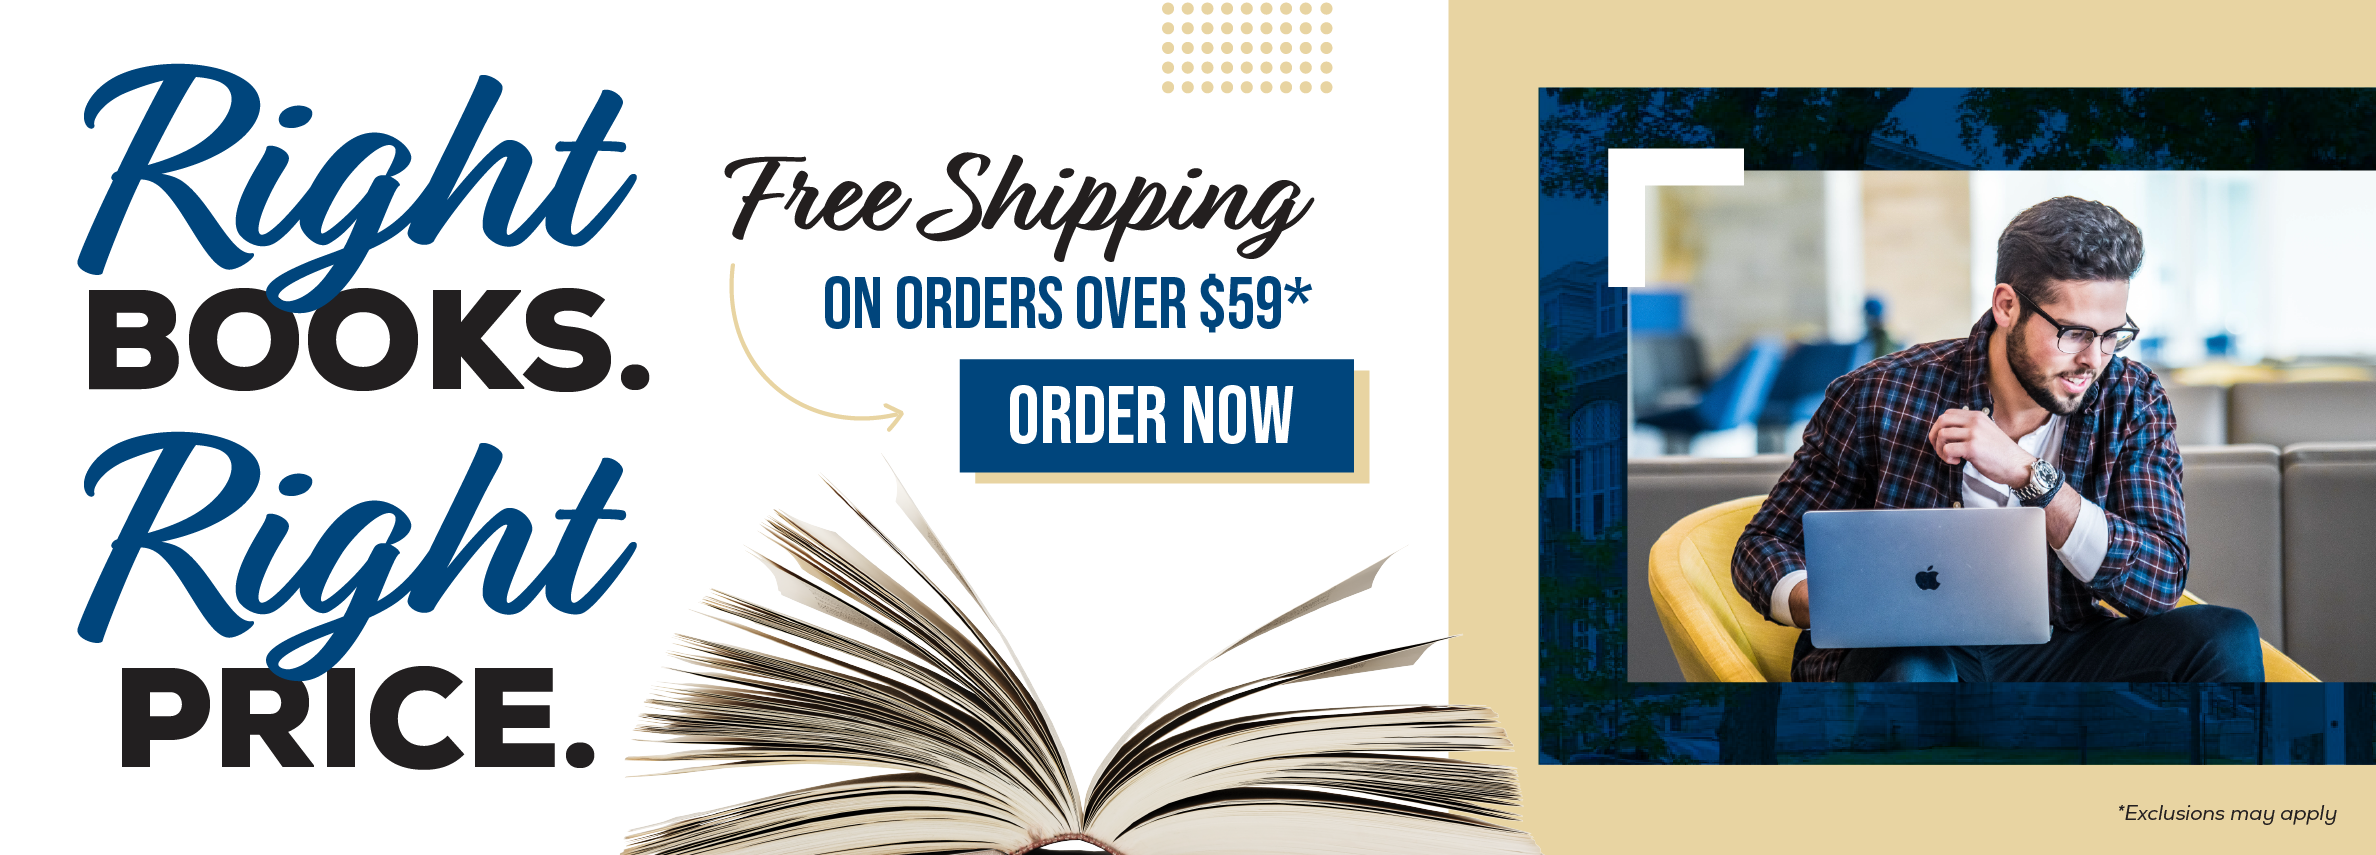 Right books. Right price. Free shipping on orders over $59.* Order now. *Exclusions may apply.